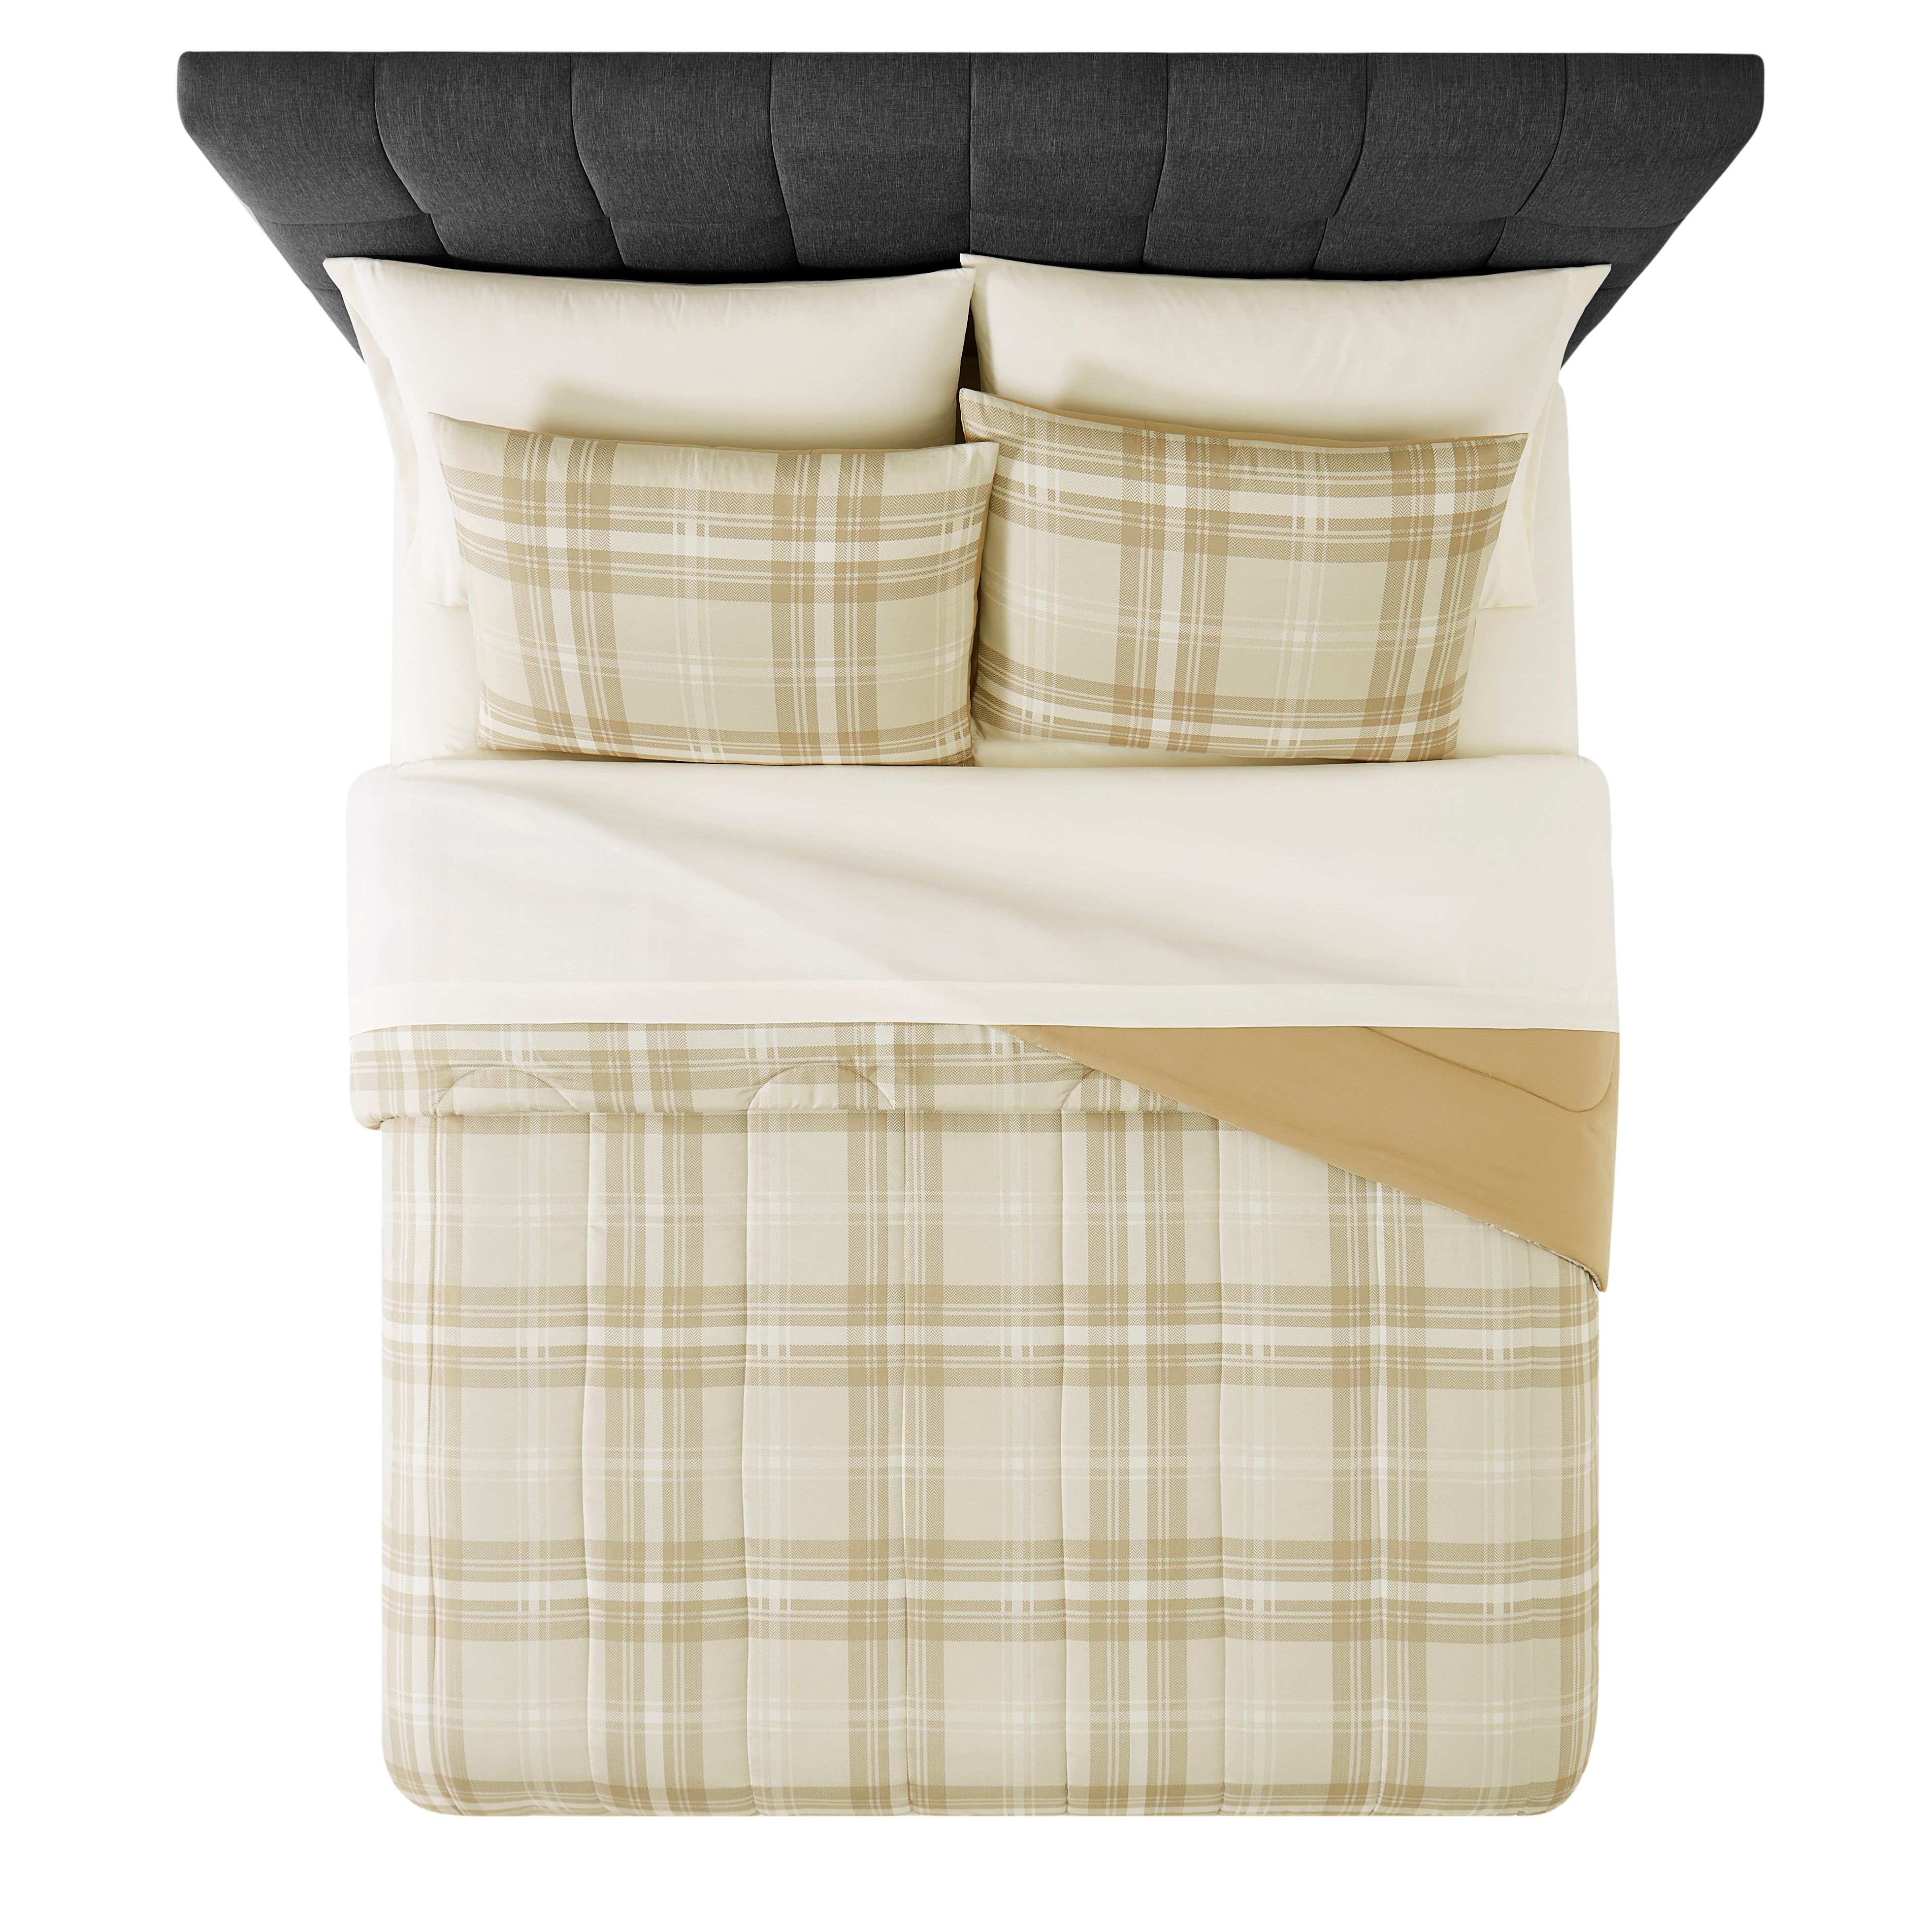 Mainstays Beige Plaid Reversible 7-Piece Bed in a Bag Comforter Set with Sheets, King - image 5 of 7